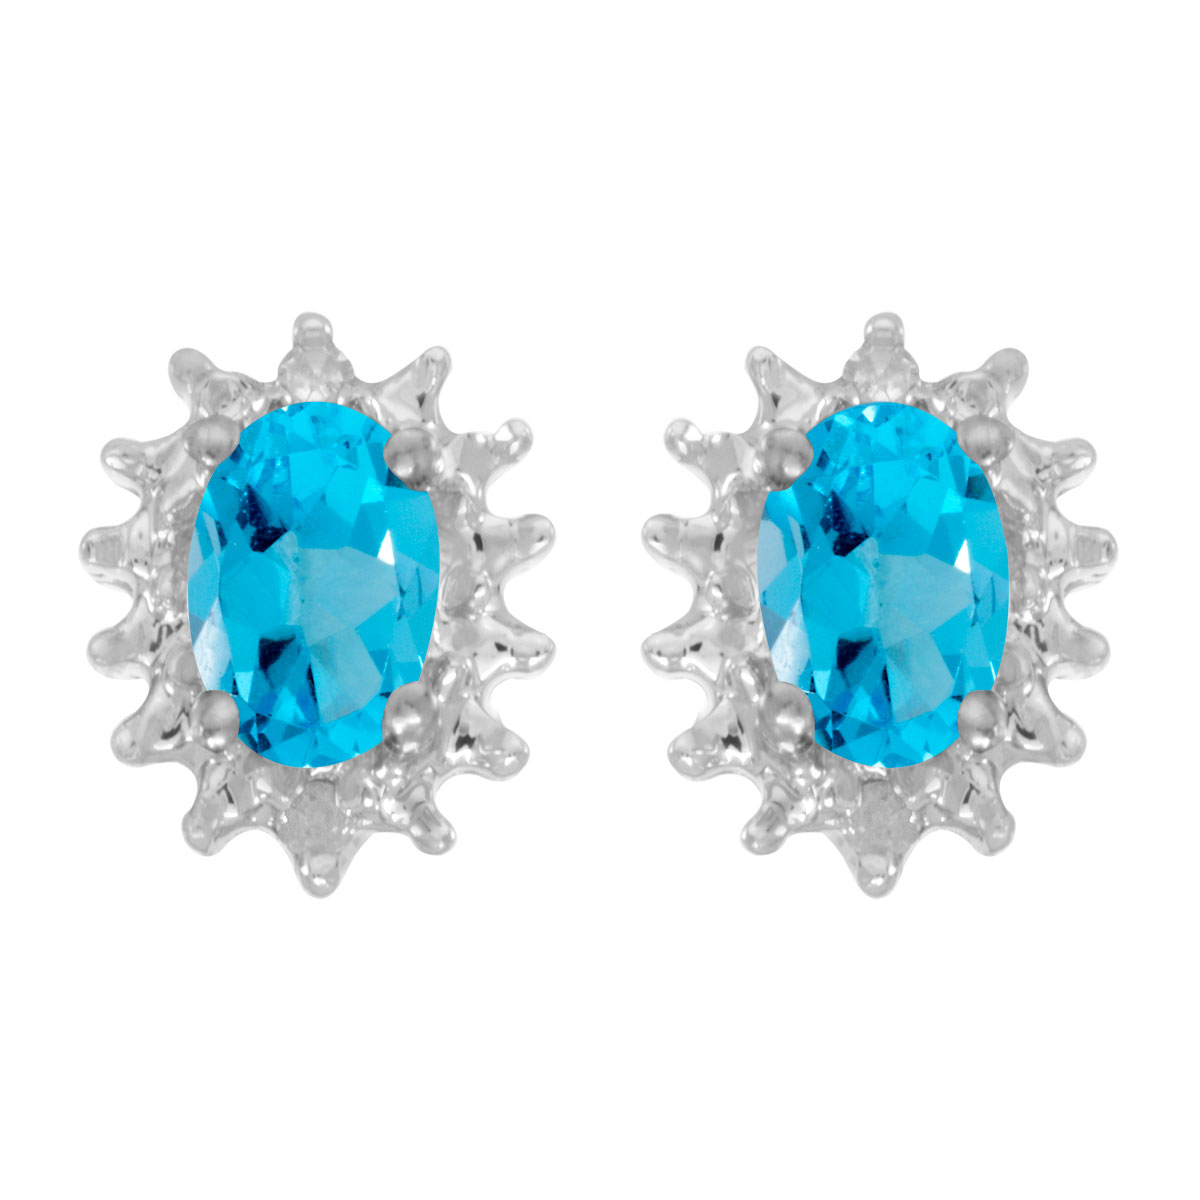 JCX1999: These 14k yellow gold oval blue topaz and diamond earrings feature 6x4 mm genuine natural blue topazs with a 0.80 ct total weight and .04 ct diamonds.